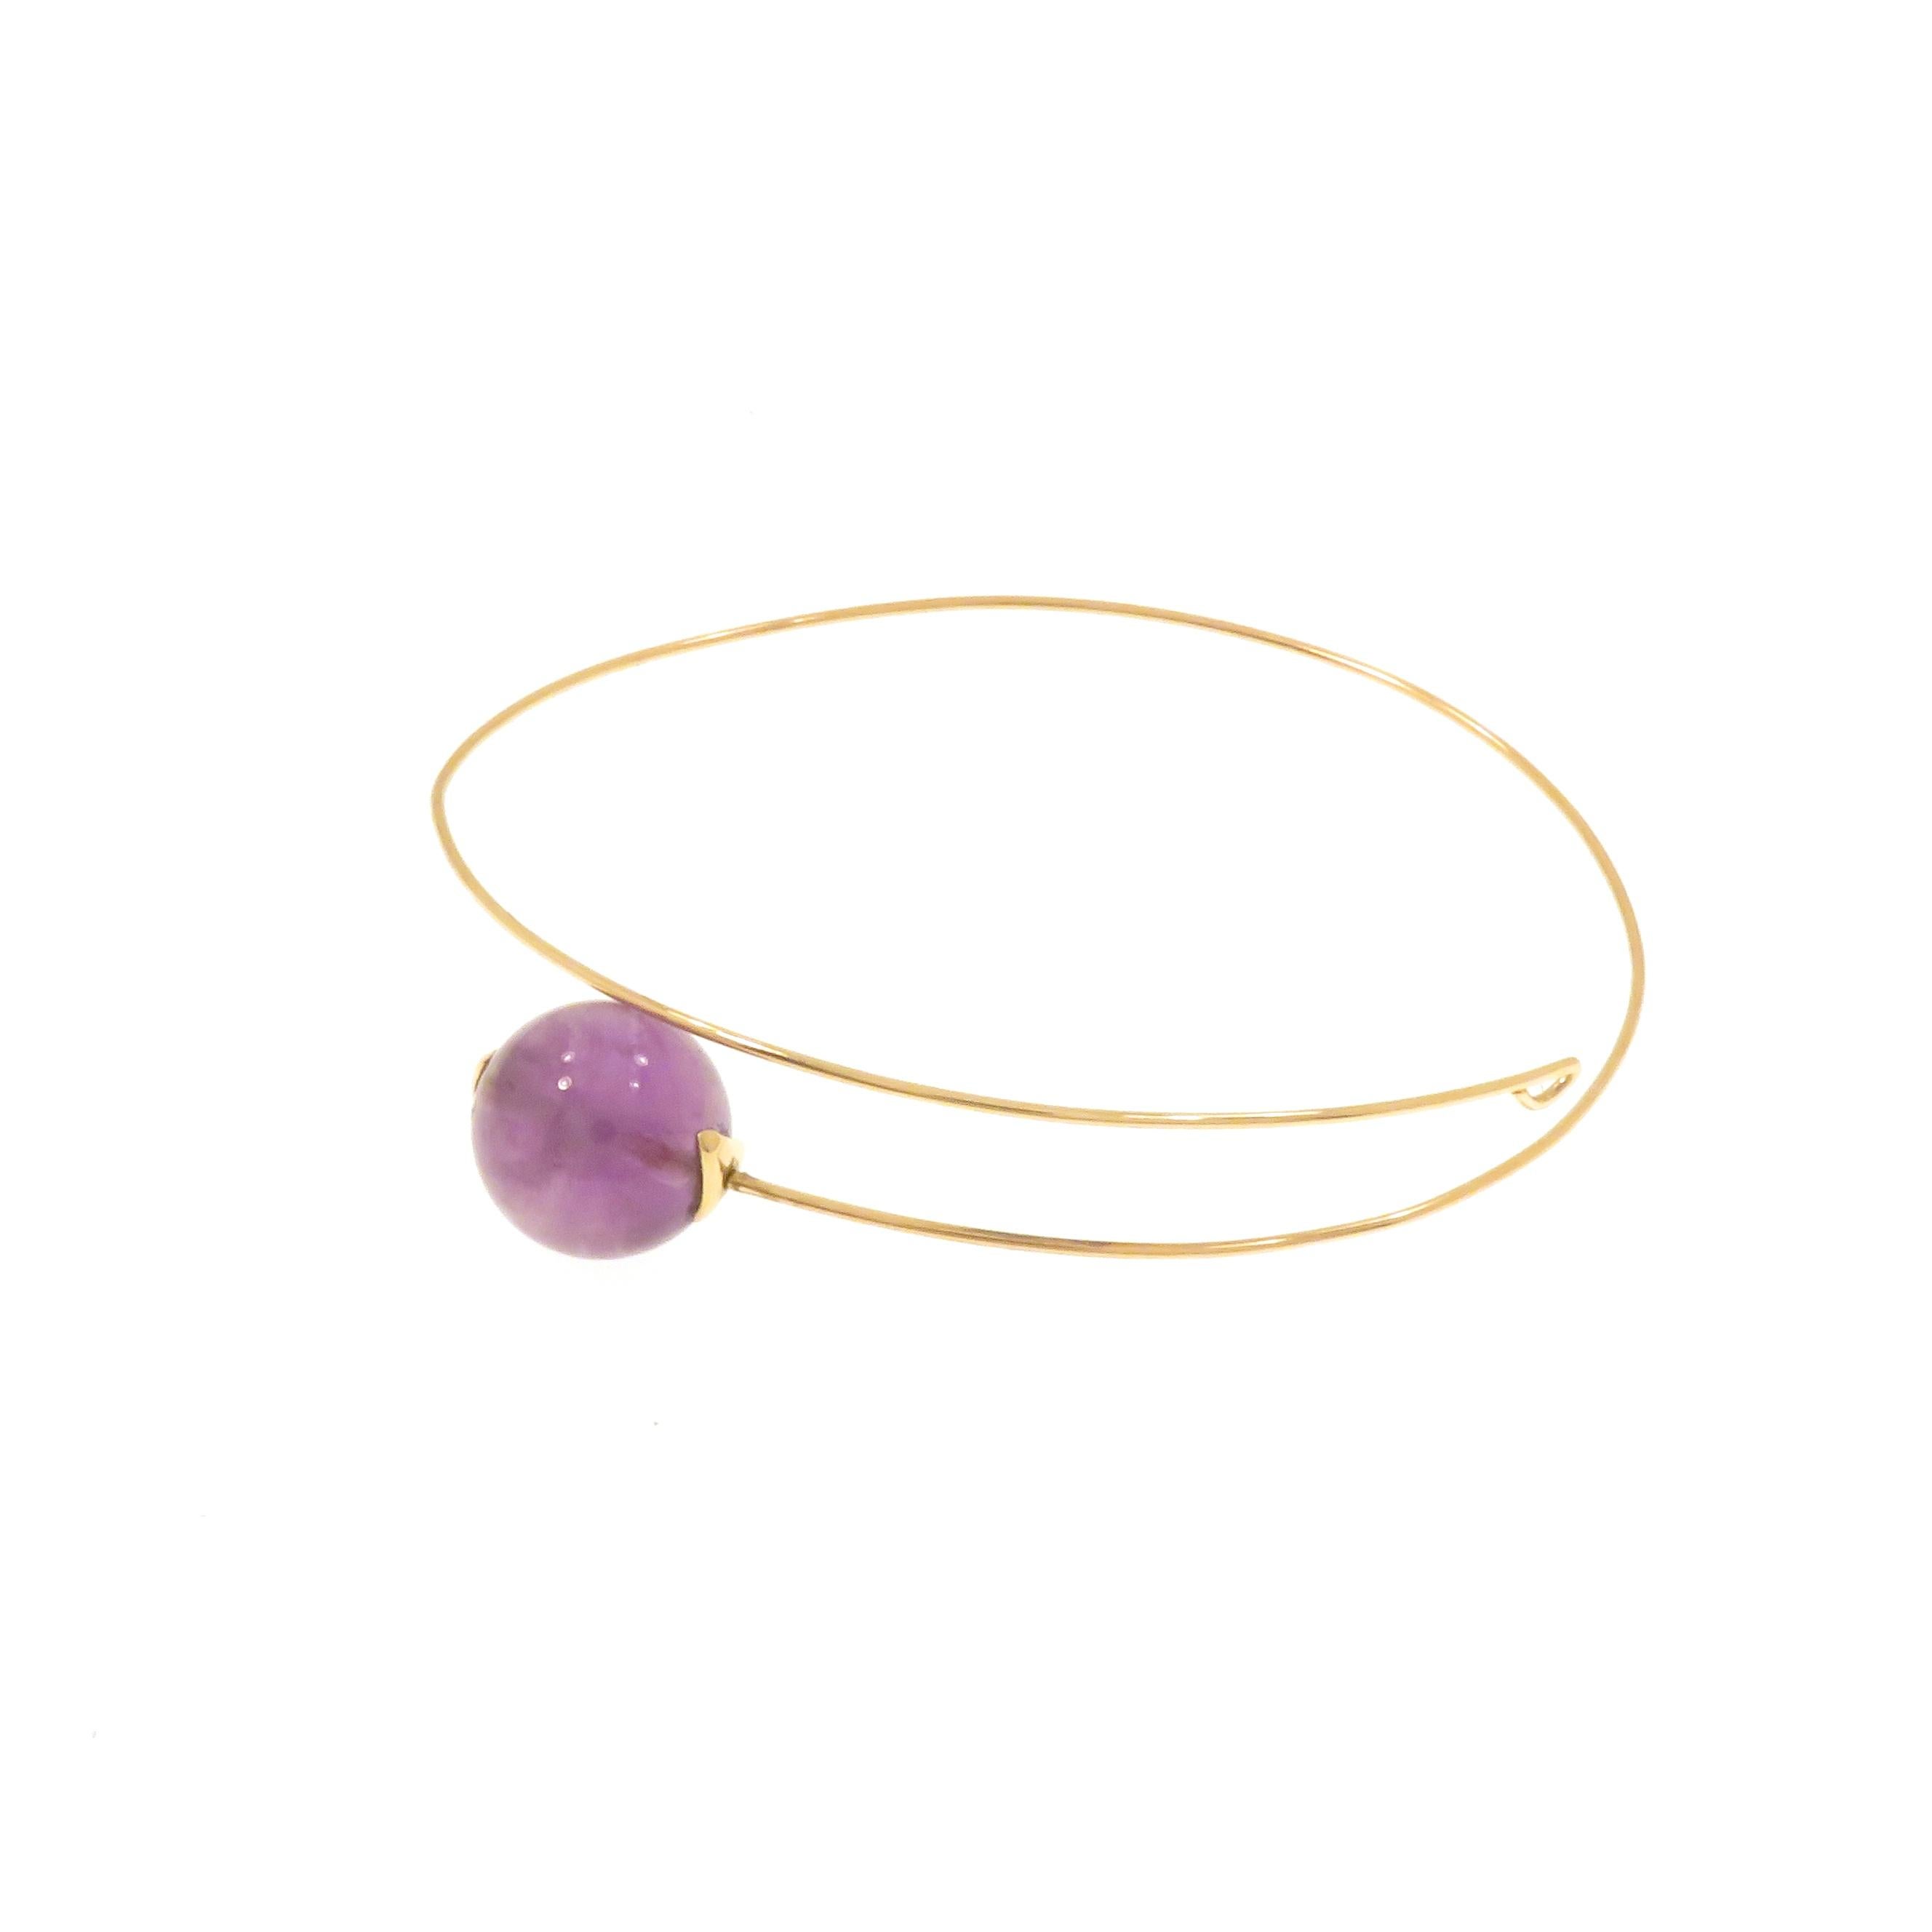 Bead Cuff Bracelet Amethyst 9 Karat Rose Gold Handcrafted in Italy For Sale